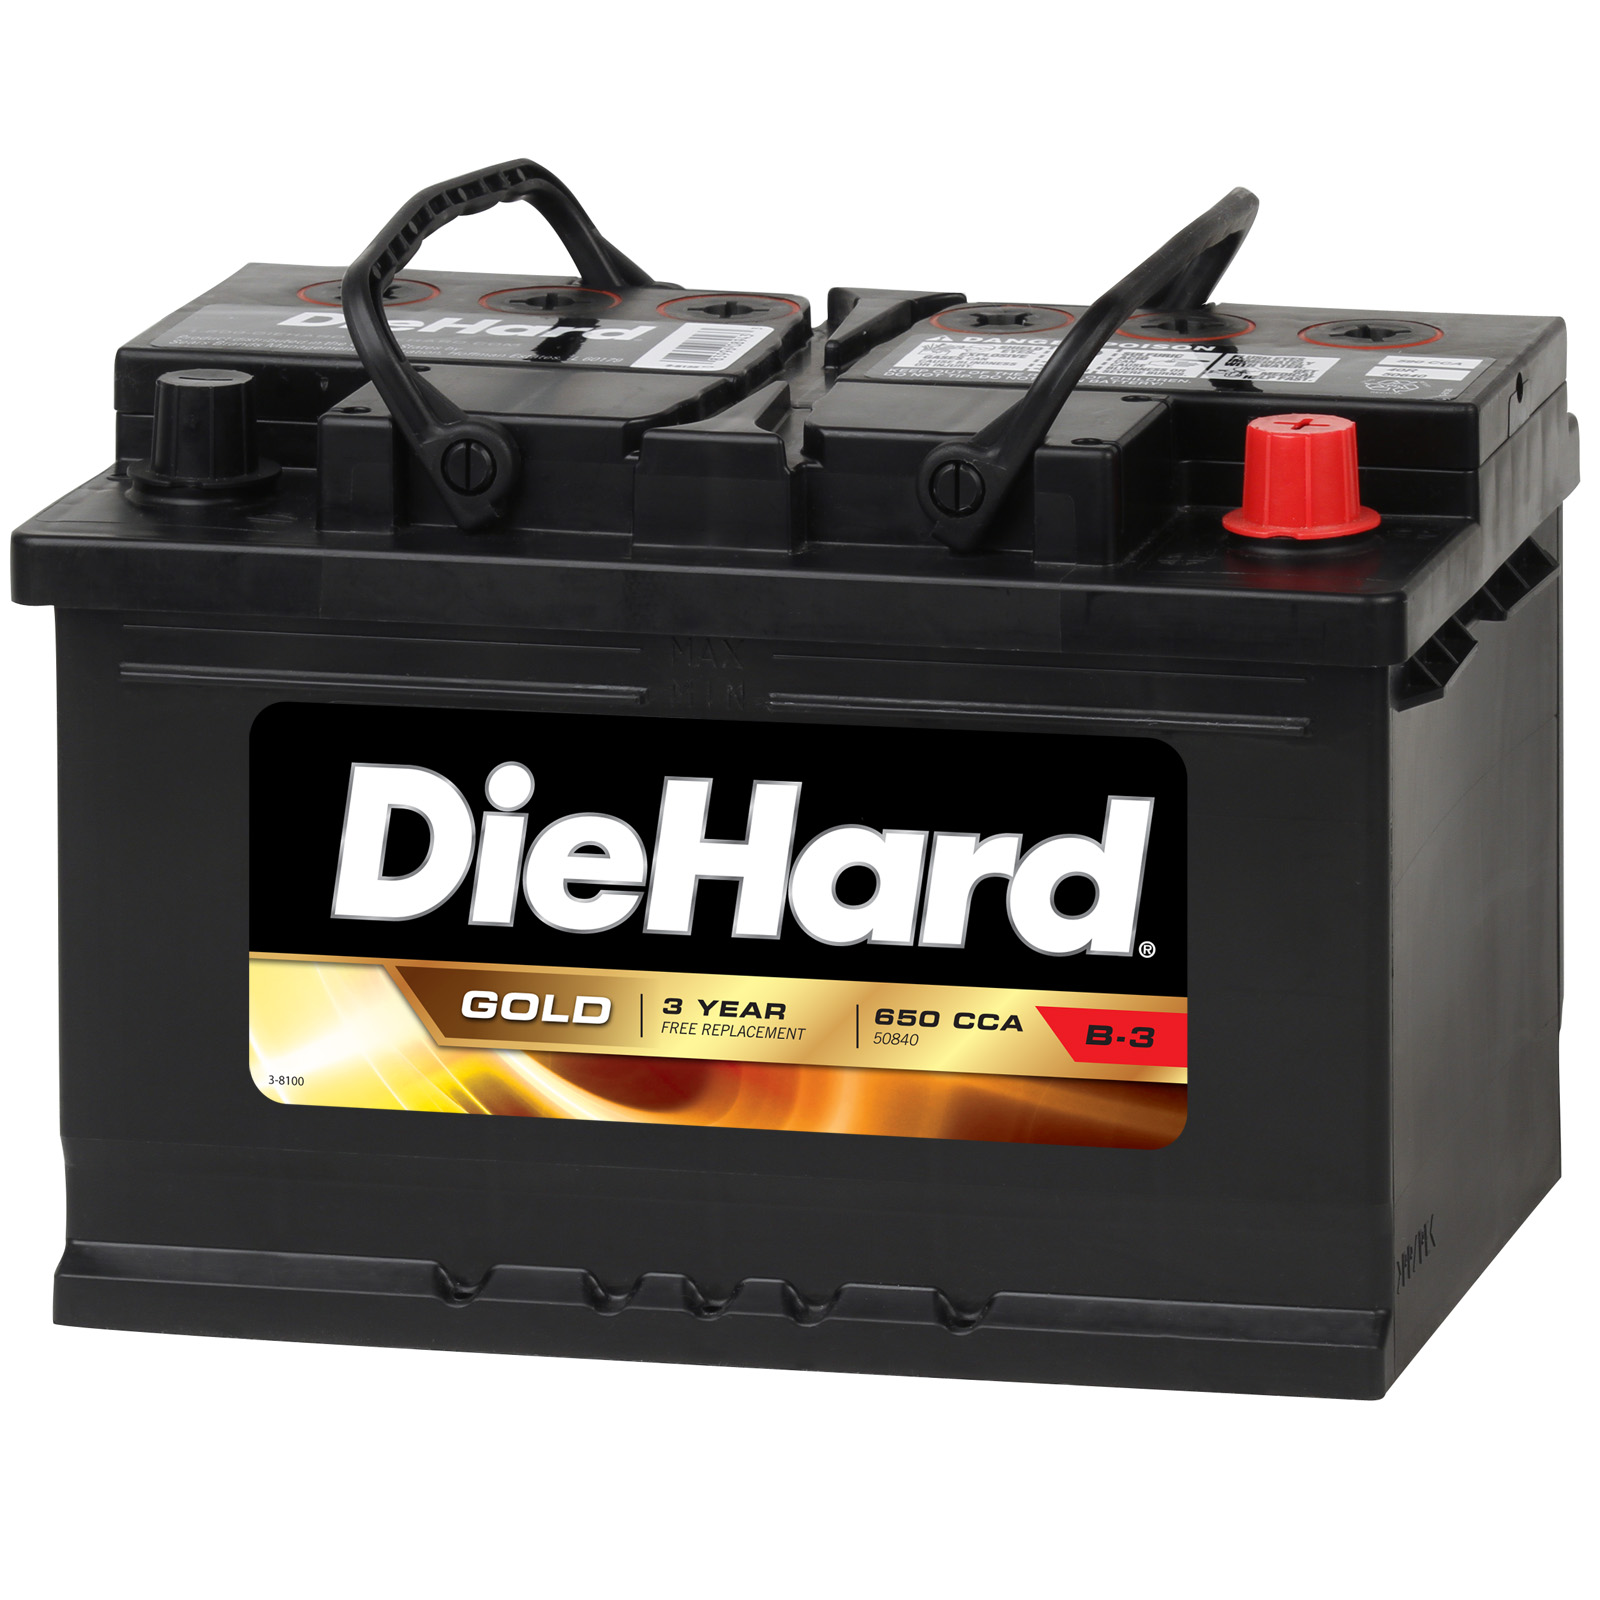 DieHard Gold Automotive Battery - Group Size EP-40R (Price with Exchange)